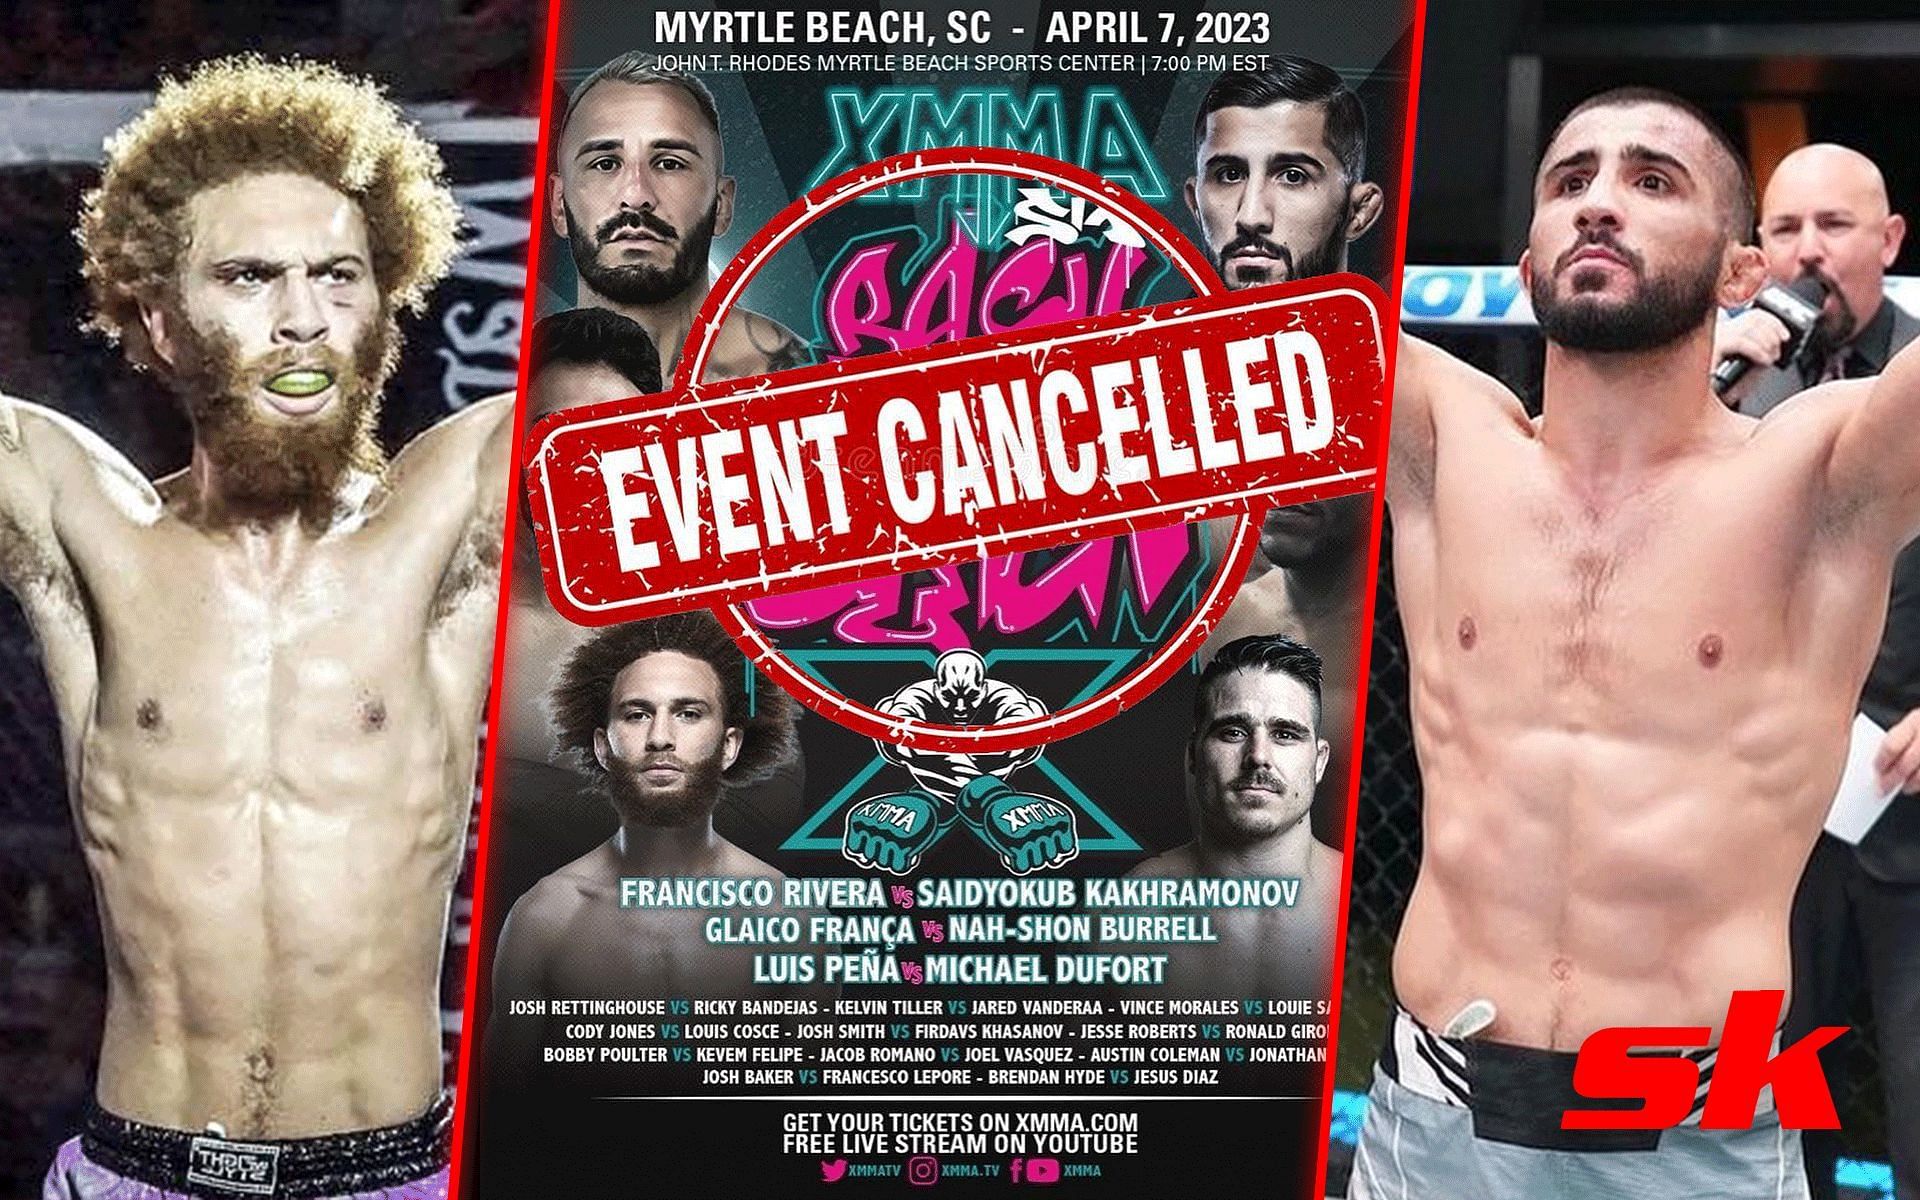 MMA event canceled MMA promotion accused of blatant incompetency after canceling an entire event featuring ex-UFC fighters